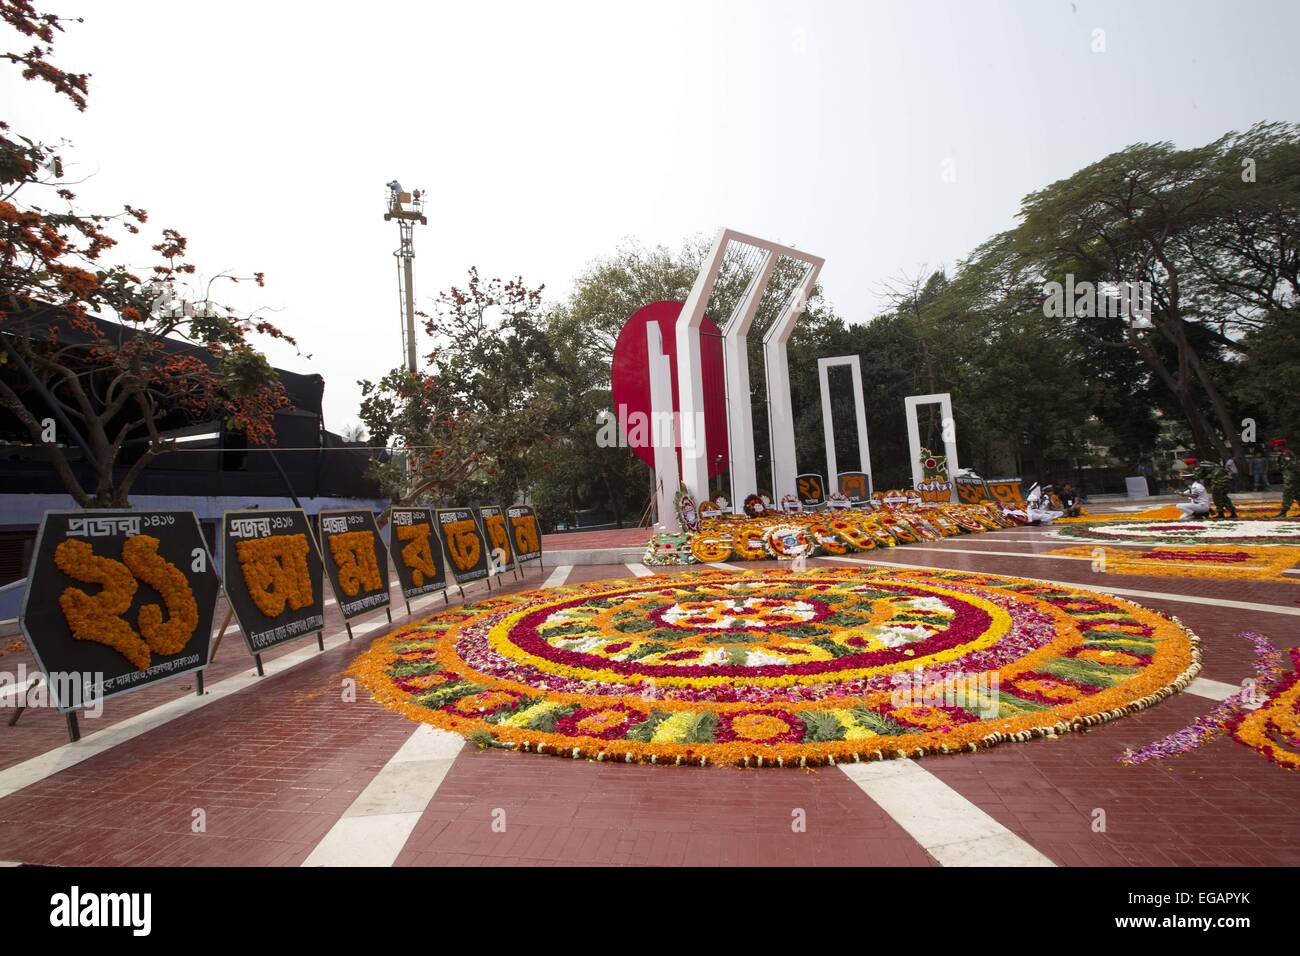 Dhaka, Bangladesh. 21th February 2015. . The martyr’s monument Central Shaheed Minar is decorated with flowers as an homage by thousands of Bangladeshi people during the International Mother Language Day, in Dhaka. The gathering marks 60 years since police fired at thousands of protesters at a university in Bangladesh demanding that Bengali be declared the state language. The deaths marked the start of a nearly two-decades-long struggle for Bangladesh which ended in victory in the 1971 independence war with Pakistan . Stock Photo